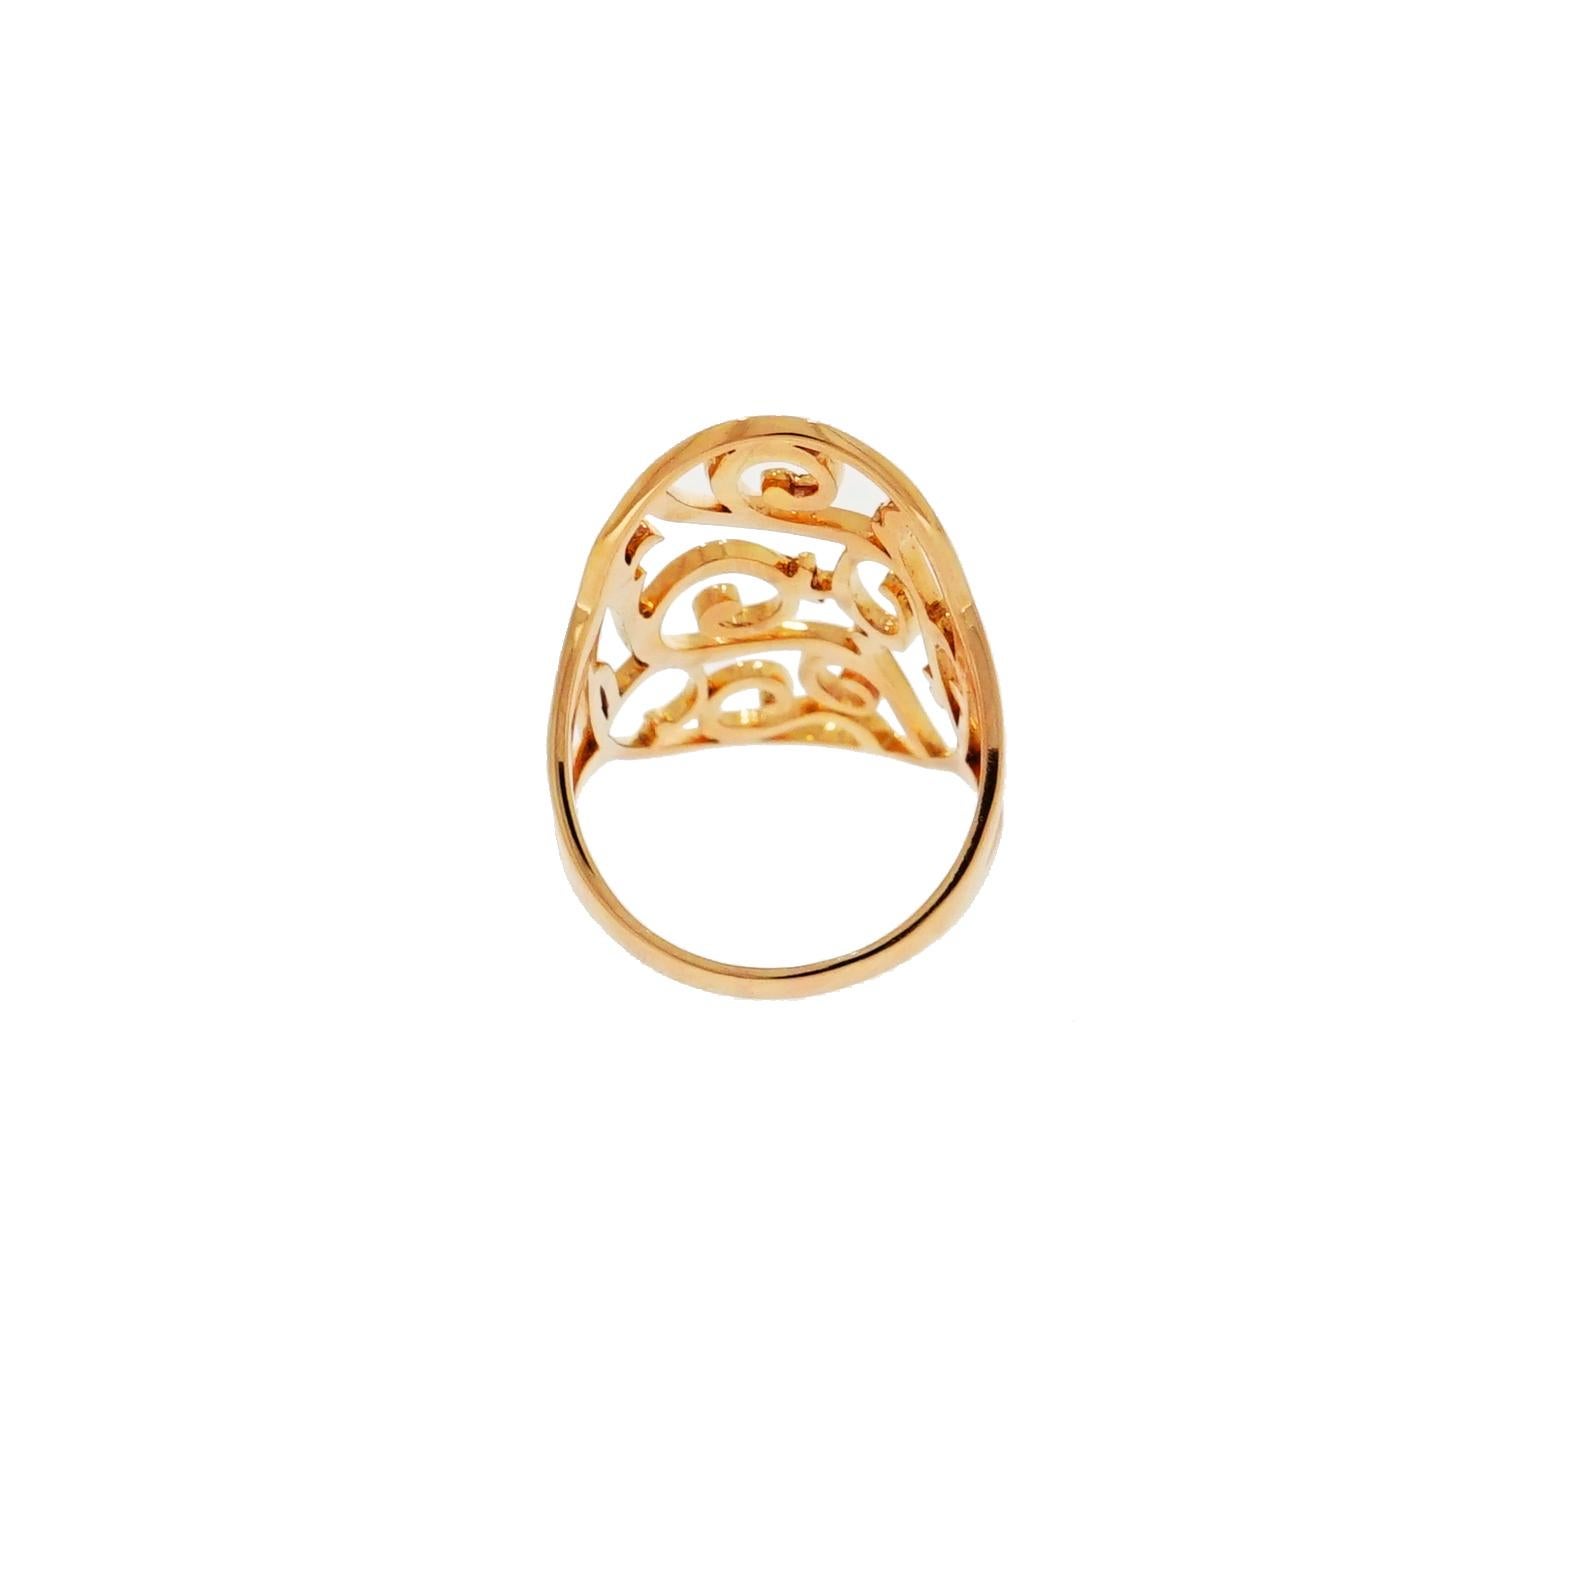 The  Siriana design is inspired by the magic oriental atmosphere reminiscent of the bygone era when East met West in Venice.
This 18k rose gold Oval shaped Ring, replicates the sheen of rich silk fabrics weaved in Venice and brought to you by